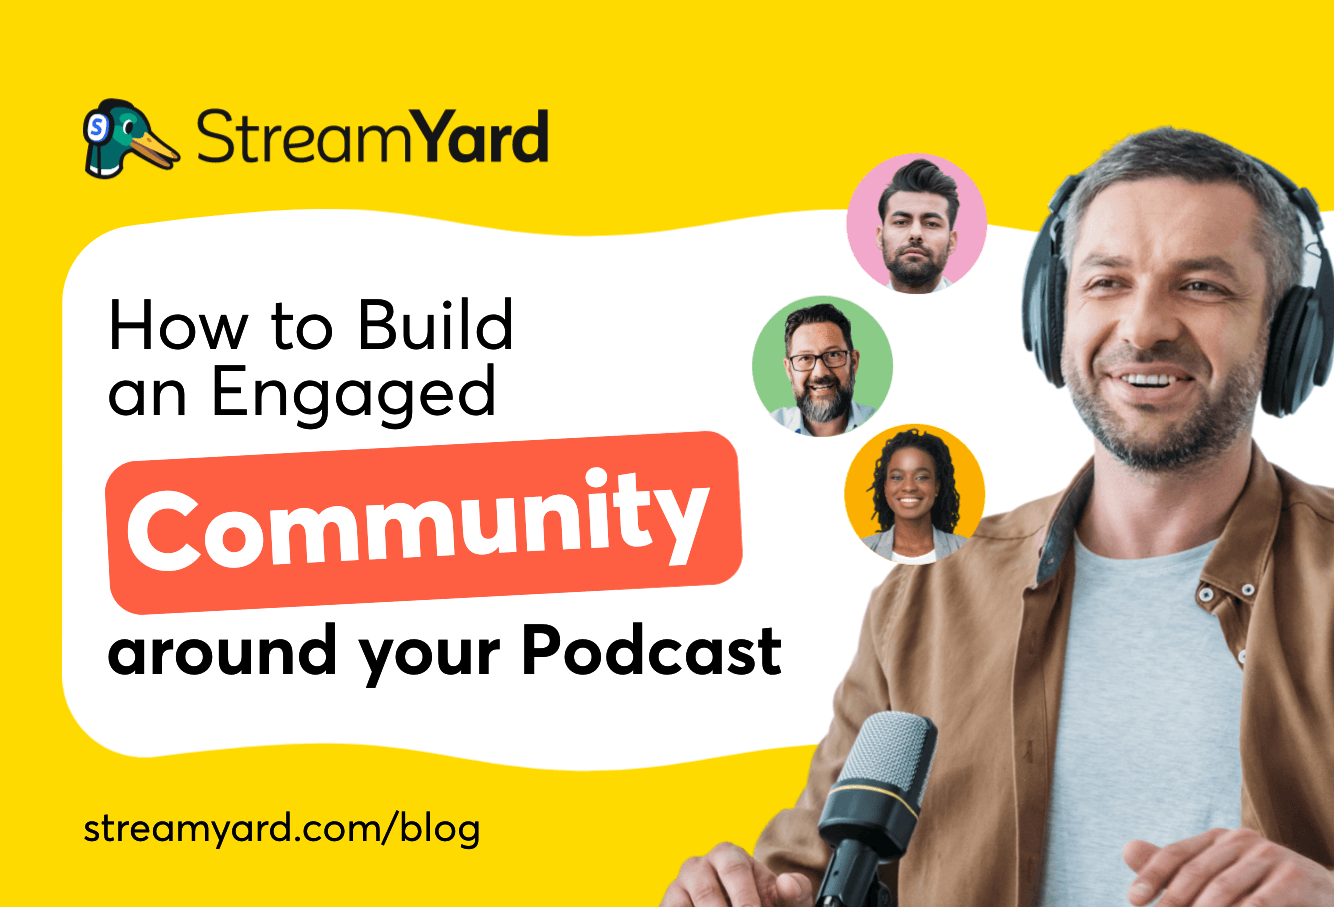 Achieve most of your content marketing goals by building a community with a podcast. Read on to know seven excellent ways to do that.